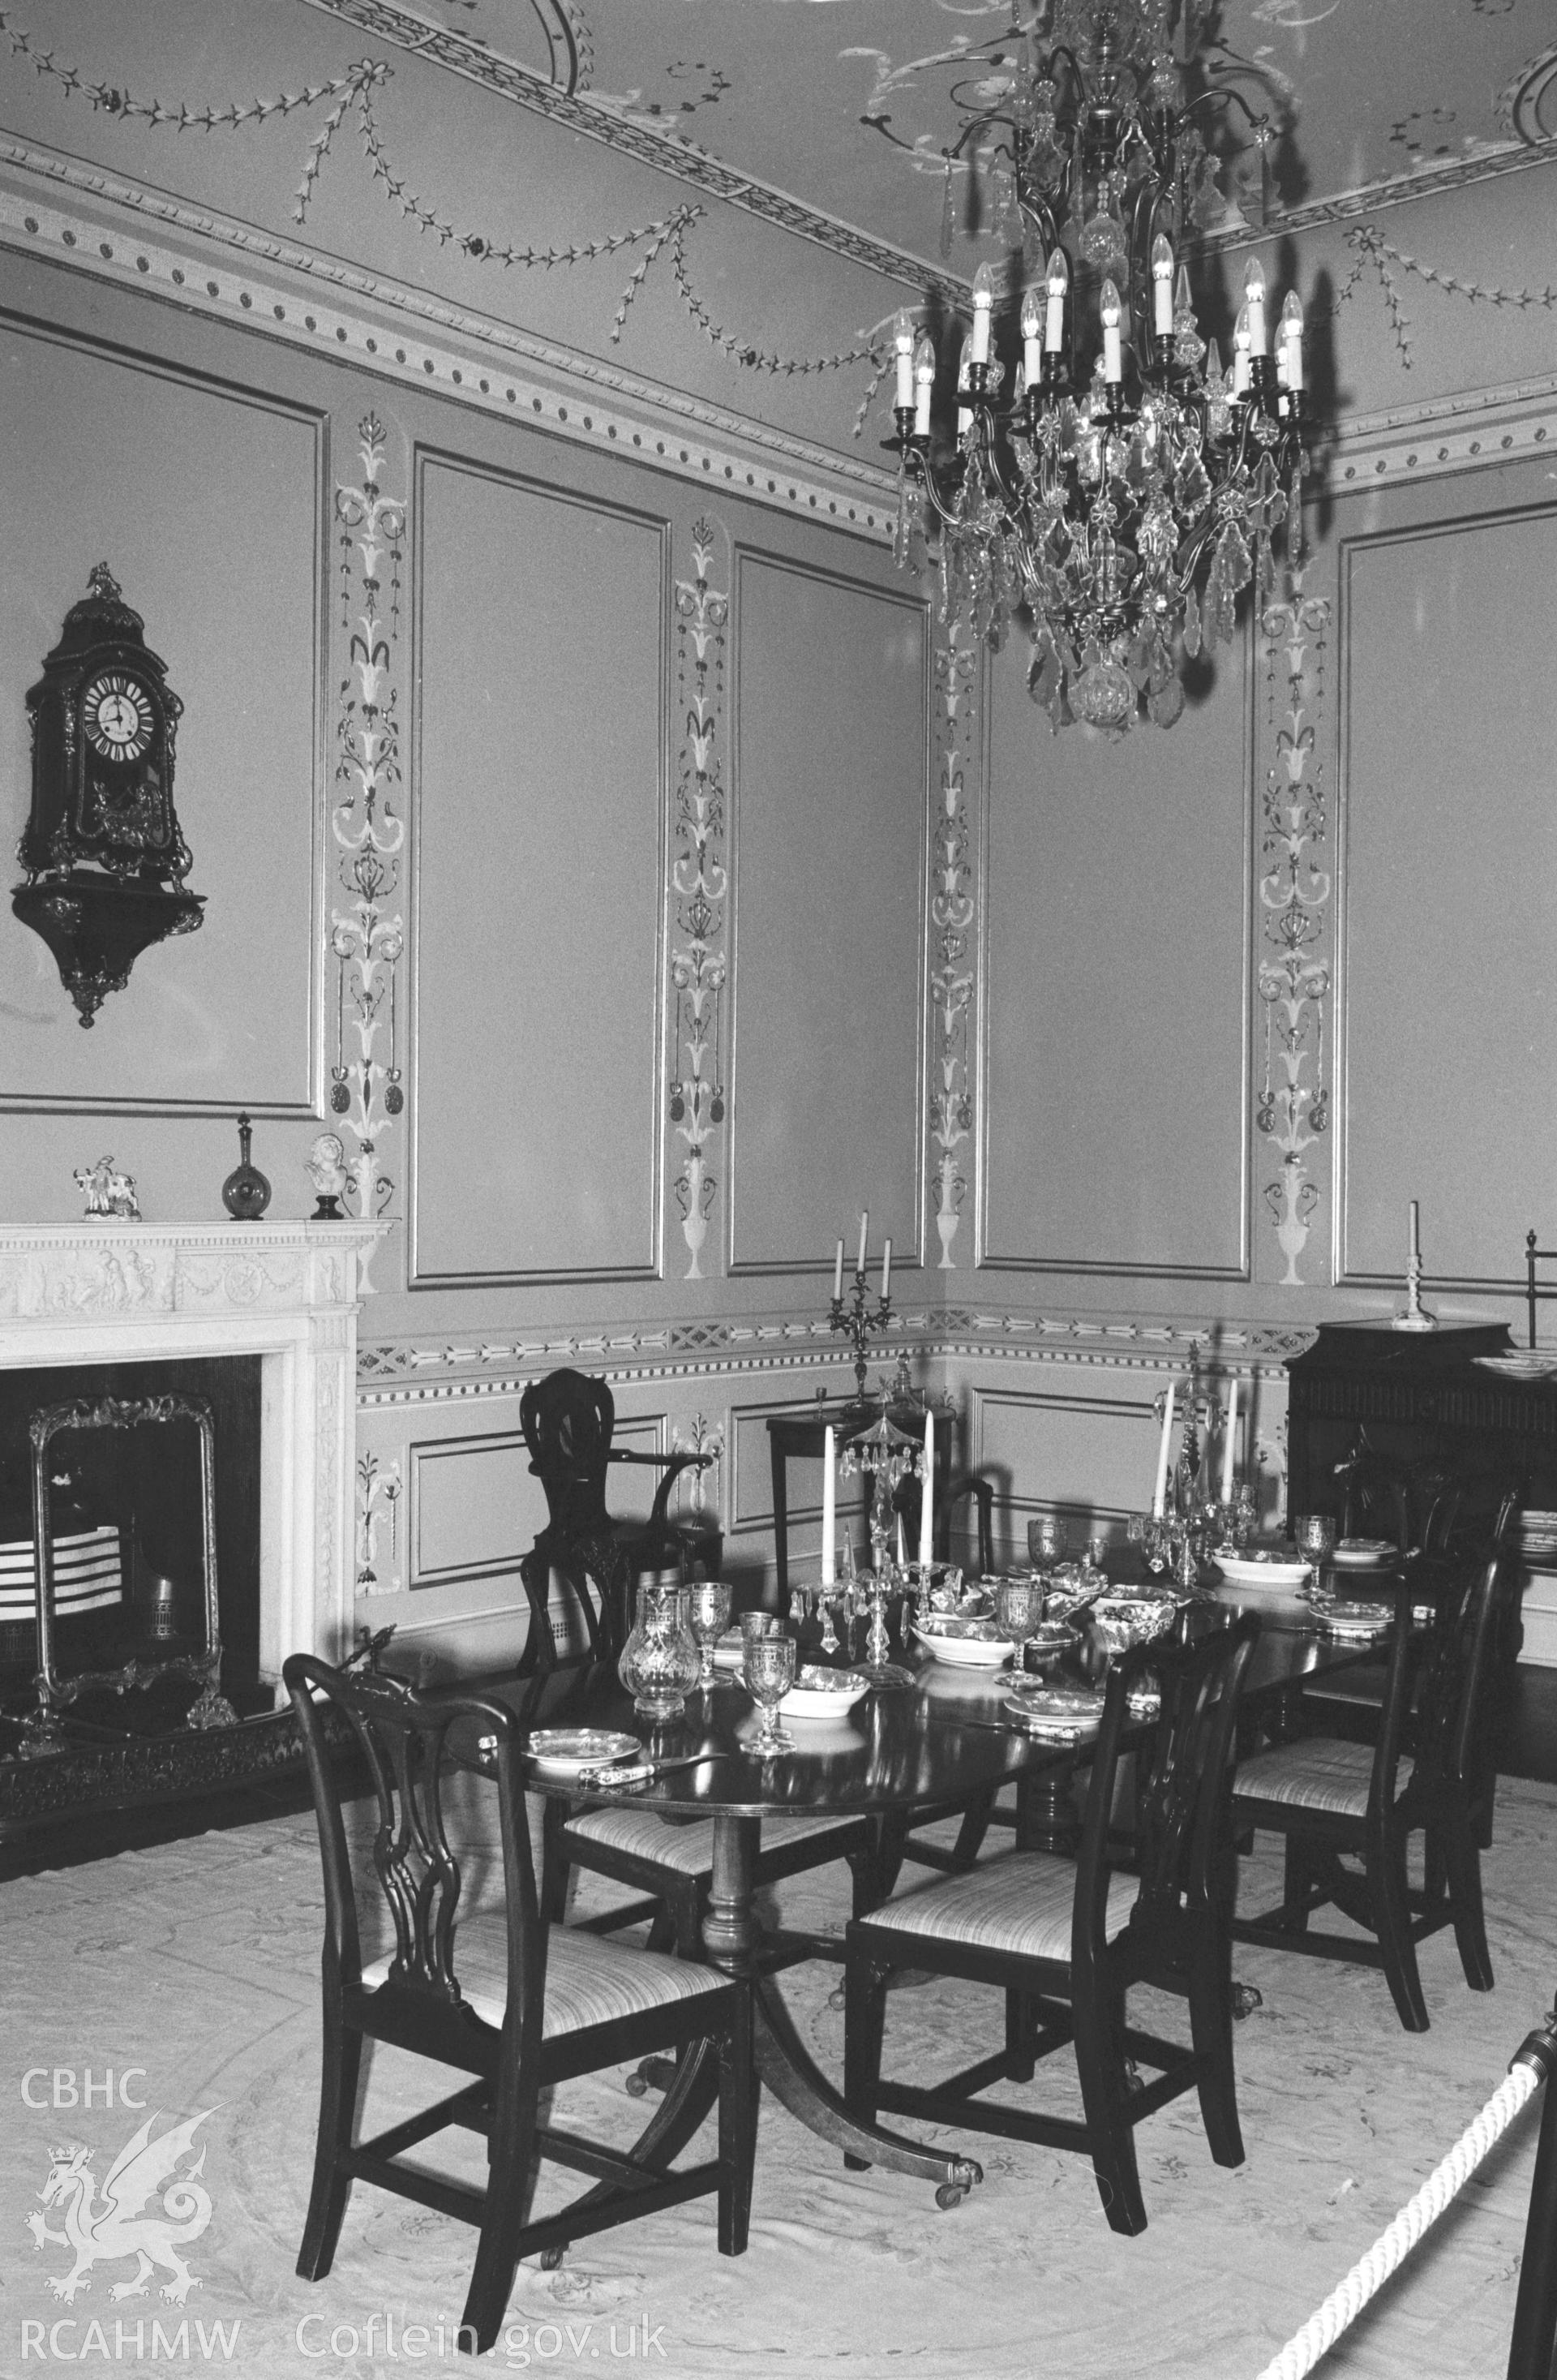 Interior views of Chirk Castle collated by the former Central Office of Information.